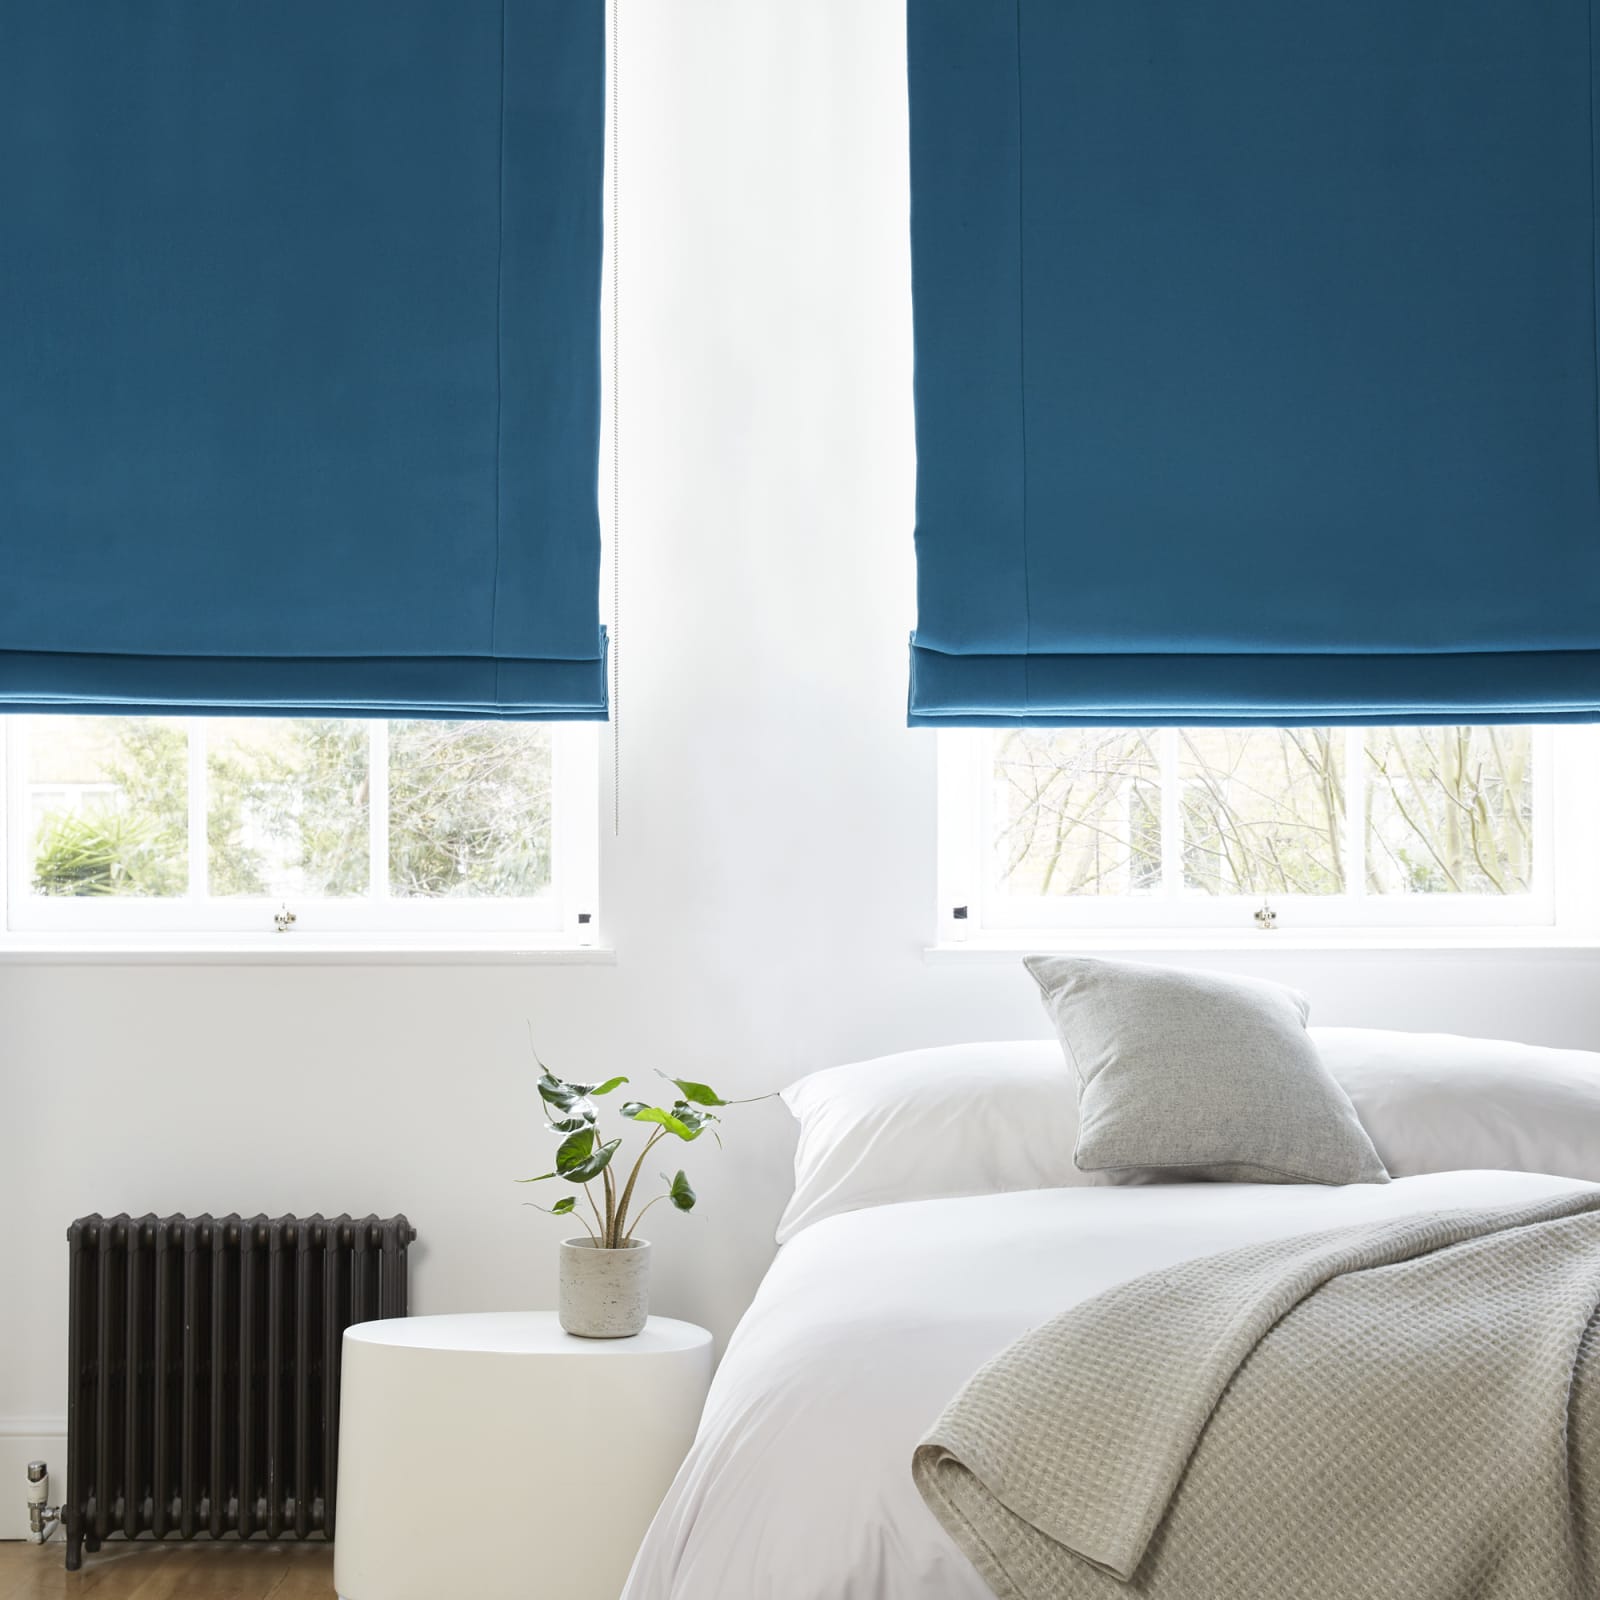 Helping you choose the perfect blinds that are made to last